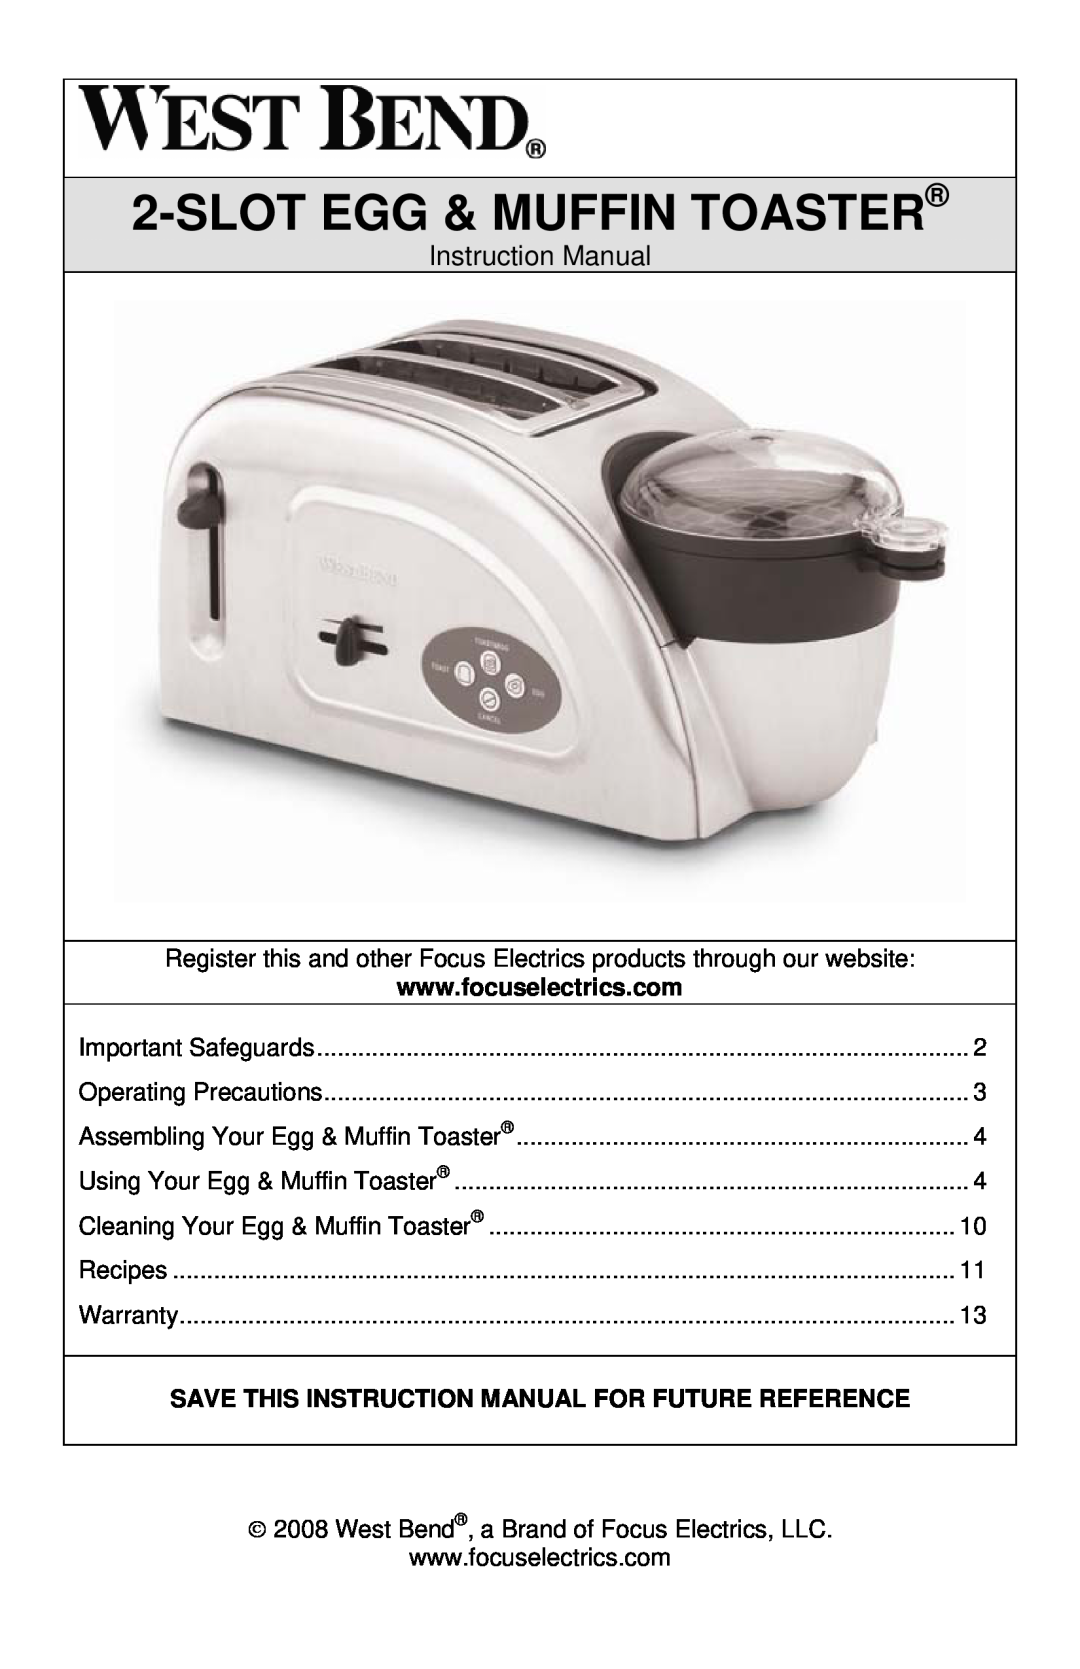 West Bend 78822, L5769 instruction manual Slotegg & Muffin Toaster 